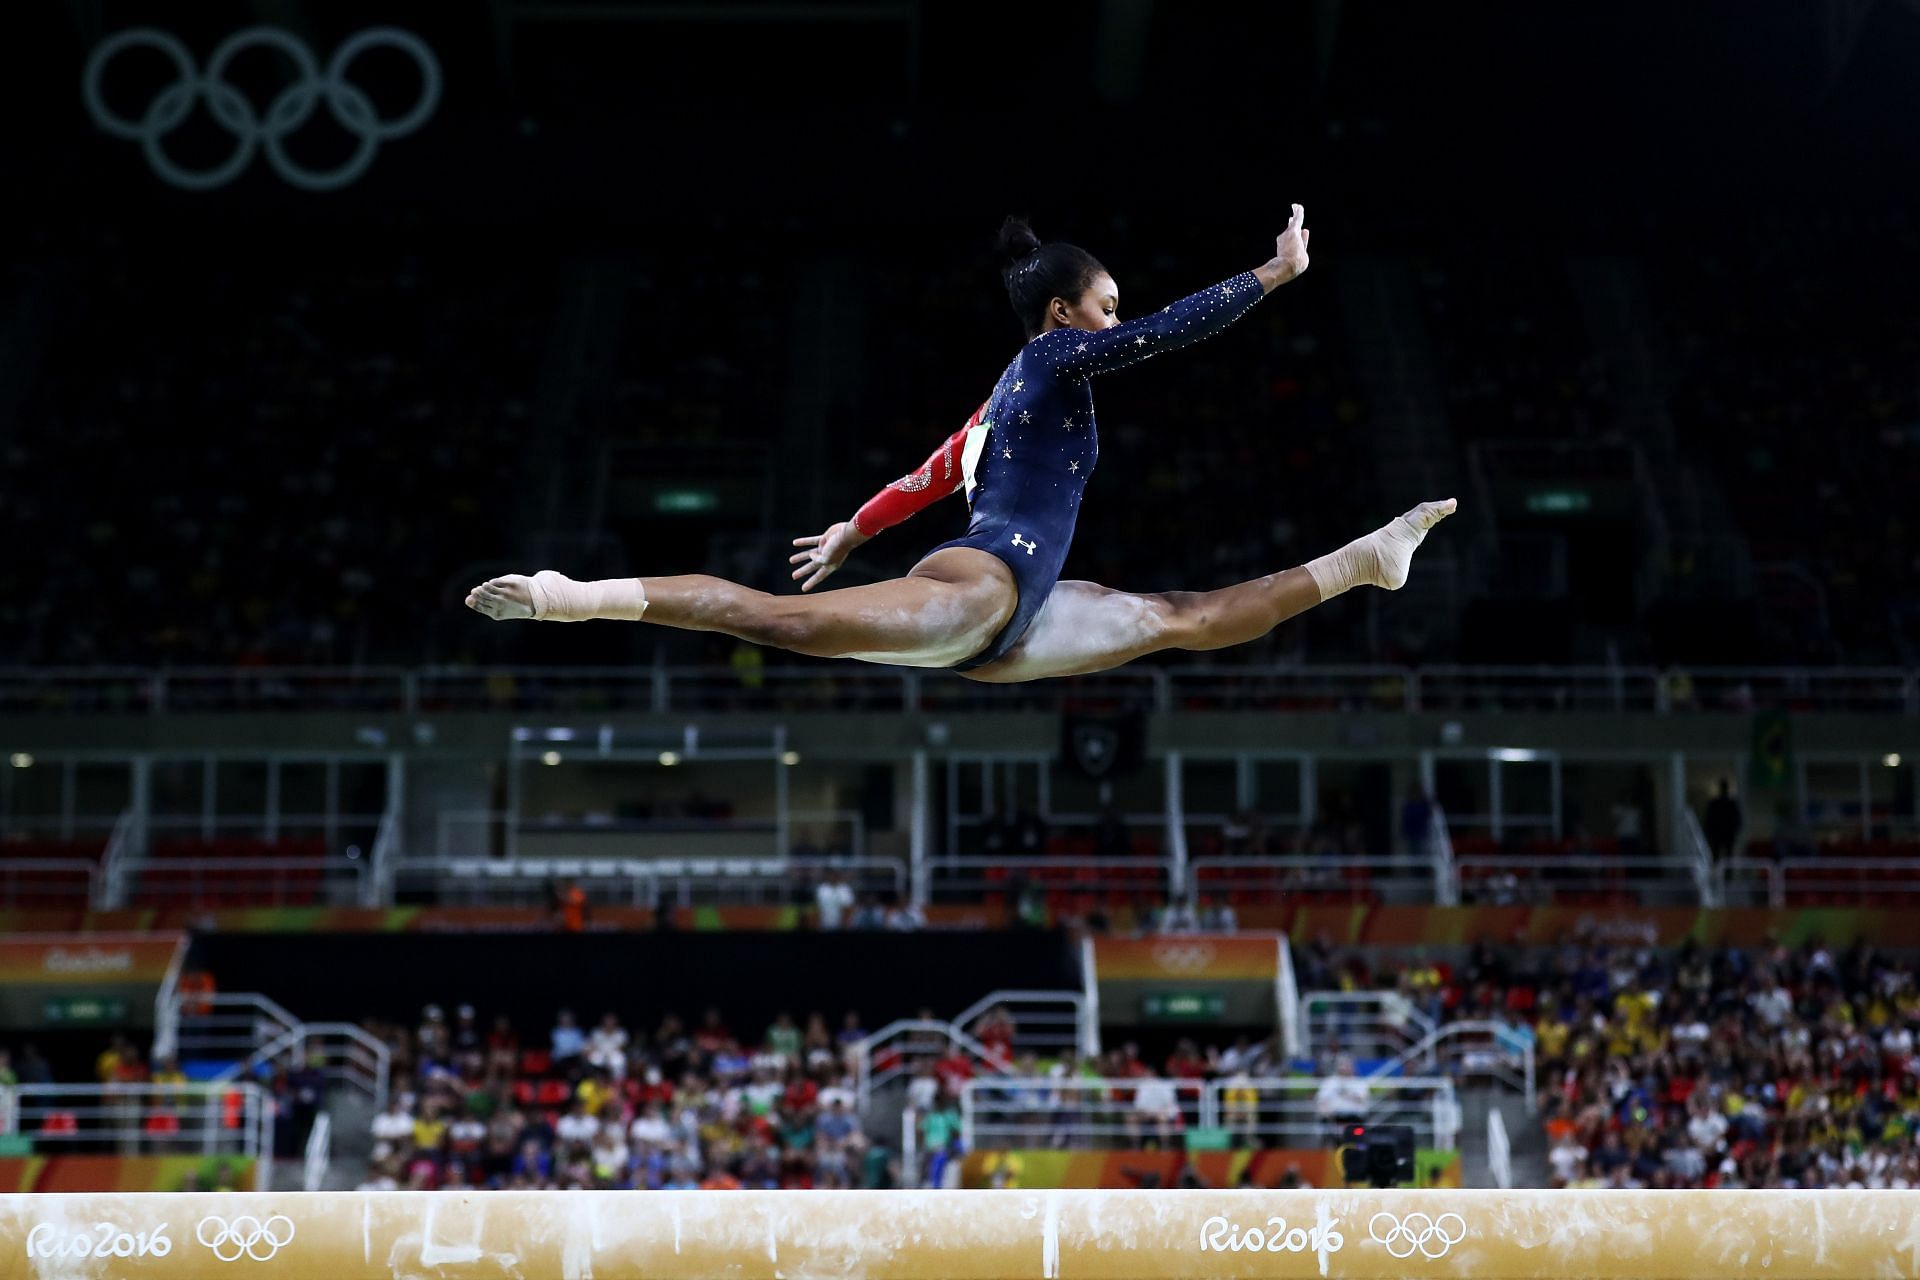 Gabby Douglas competes on the balance beam at the Rio Olympics 2016. (Photo by Ezra Shaw/Getty Images)